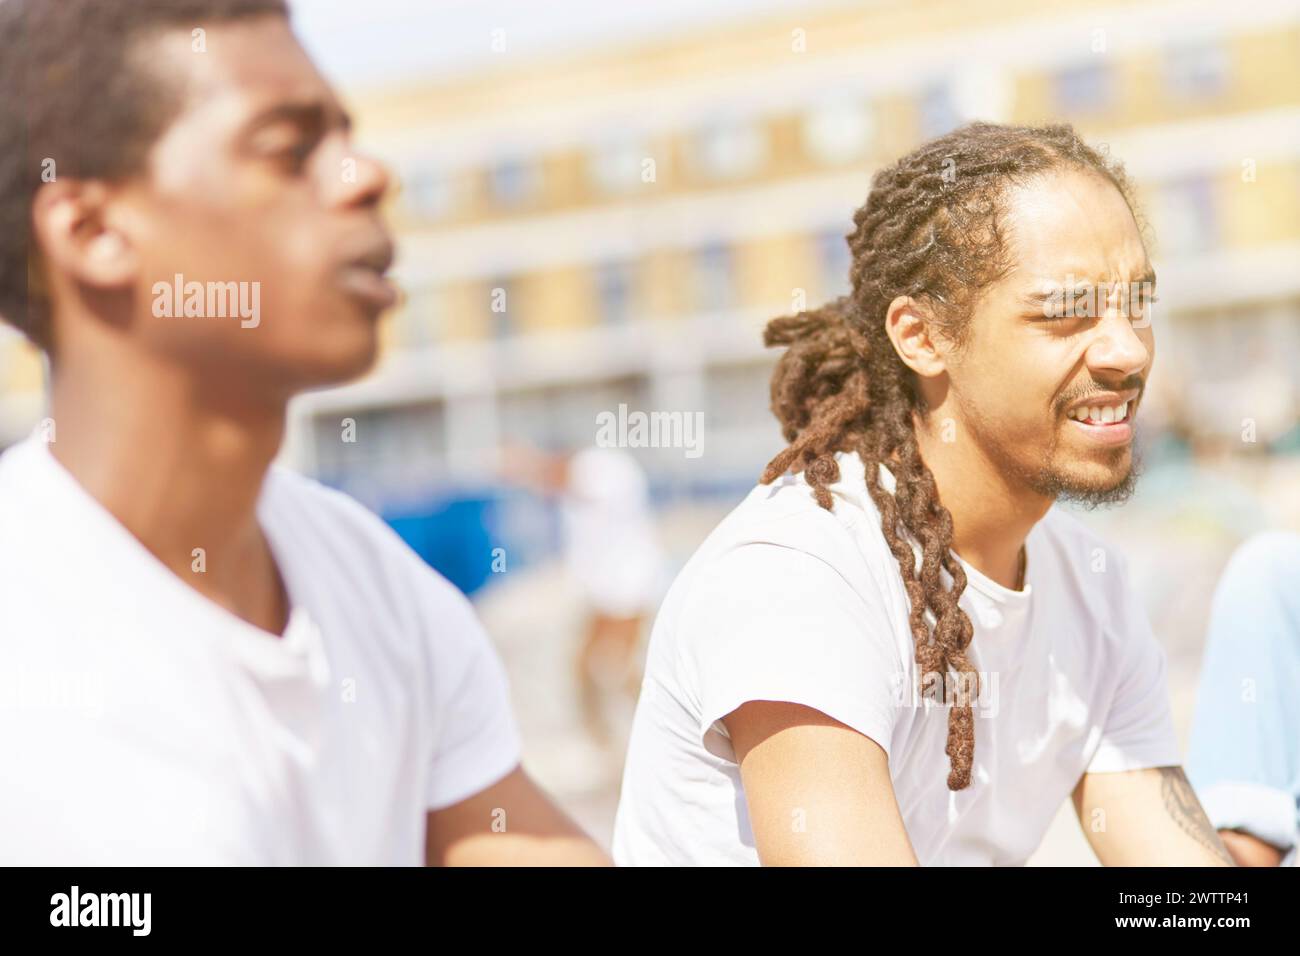 Two individuals outdoors squinting in sunlight Stock Photo